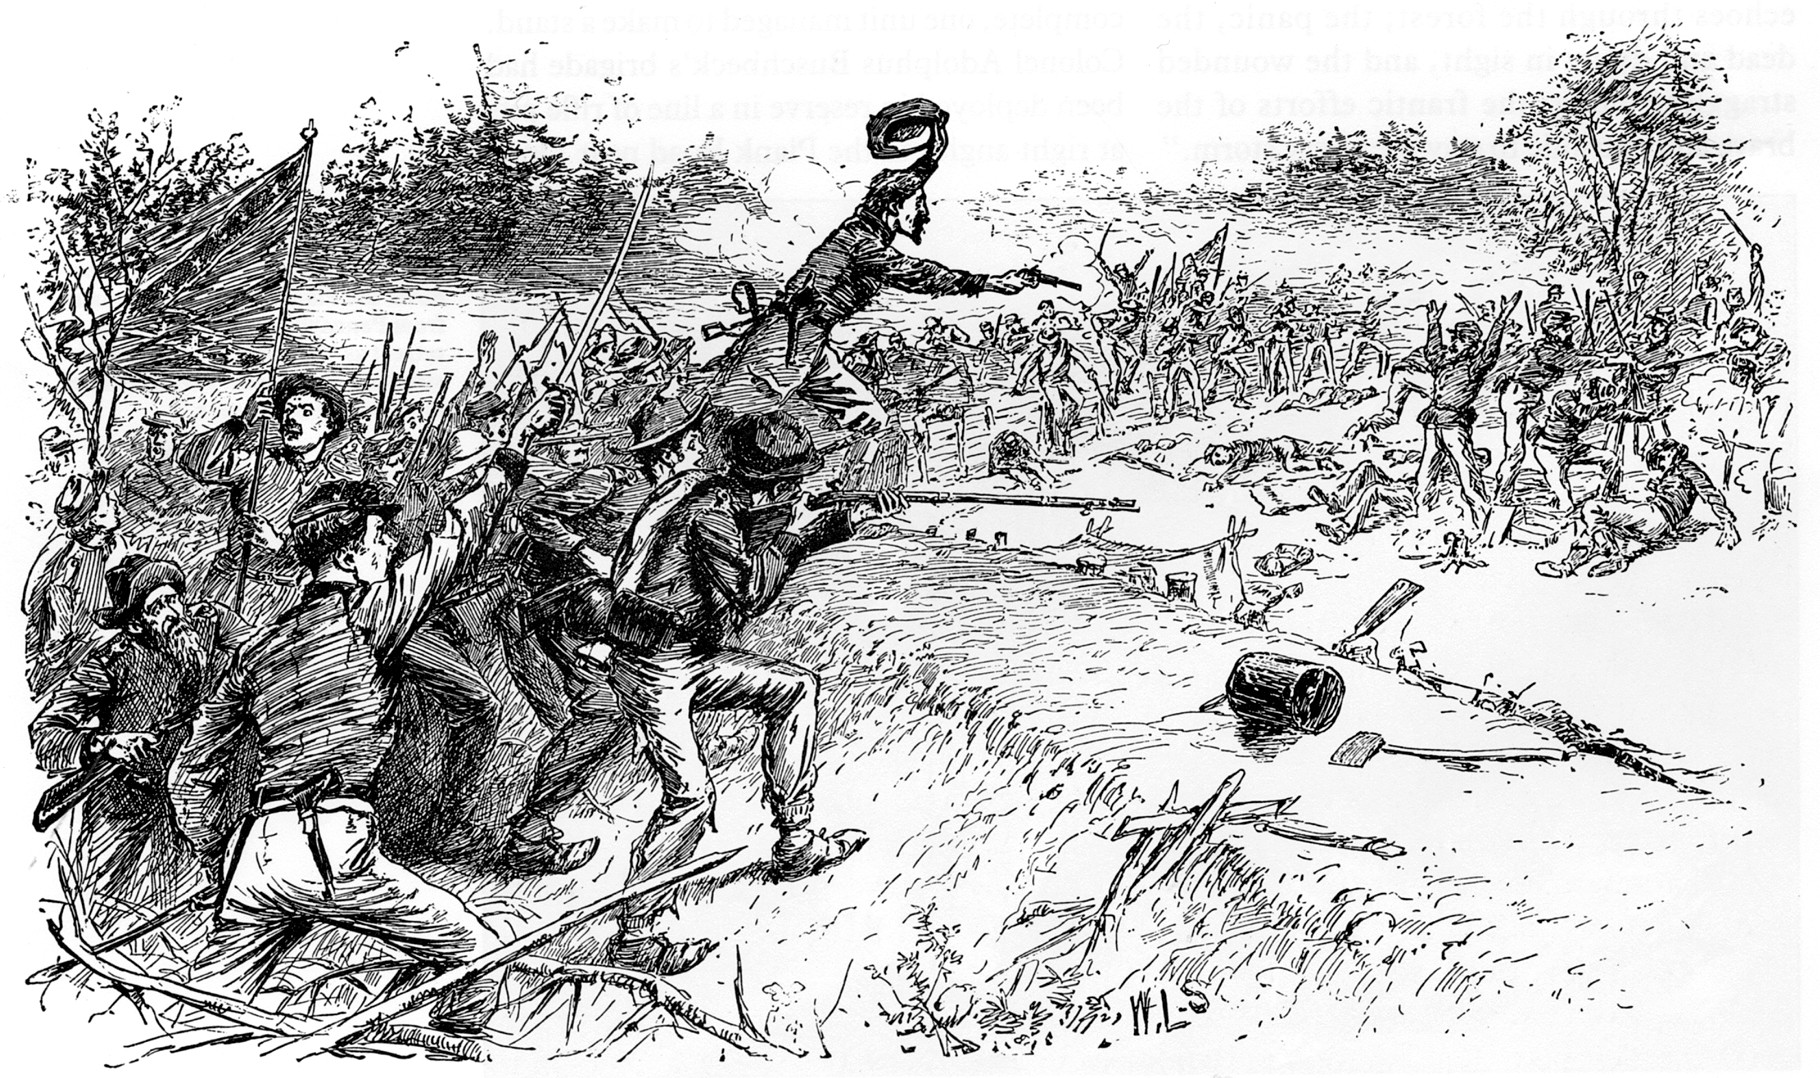 At Chancellorsville, “Stonewall” Jackson flanked Hooker’s Union army. Humiston was hit by a spent bullet, but not seriously wounded, as his regiment tried—unsuccessfully—to stop the Confederate assault.